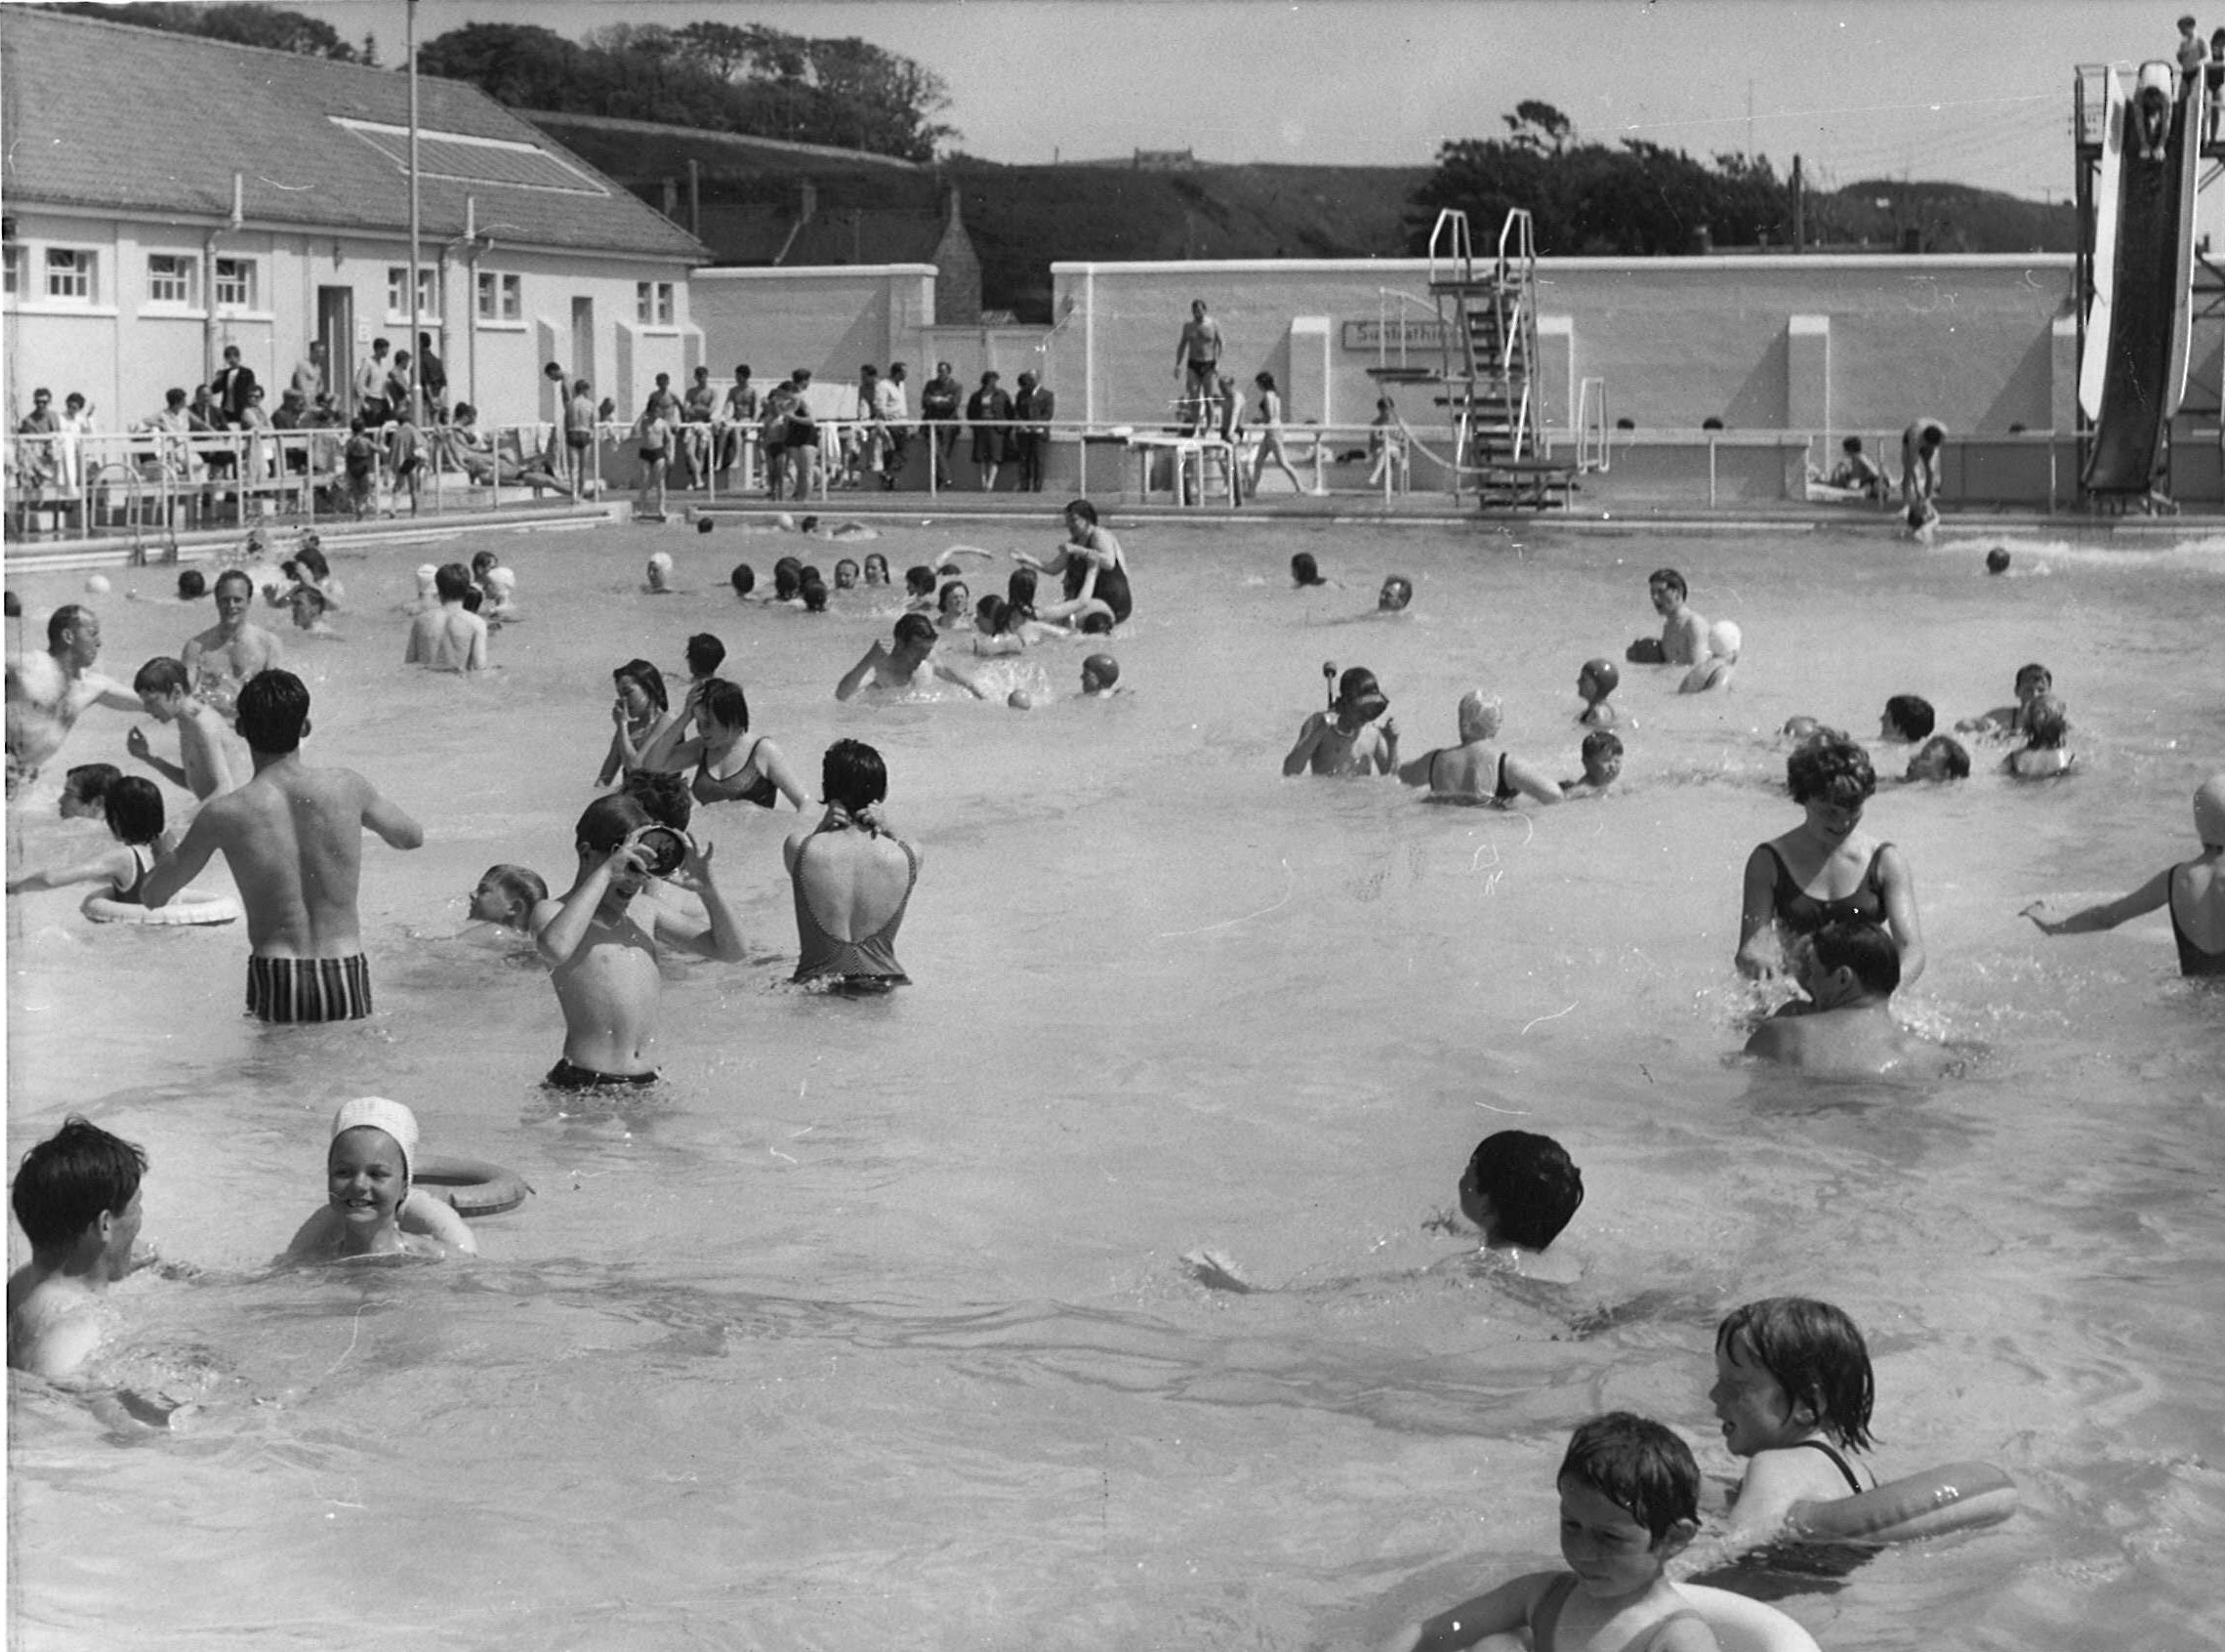 The pool in 1974